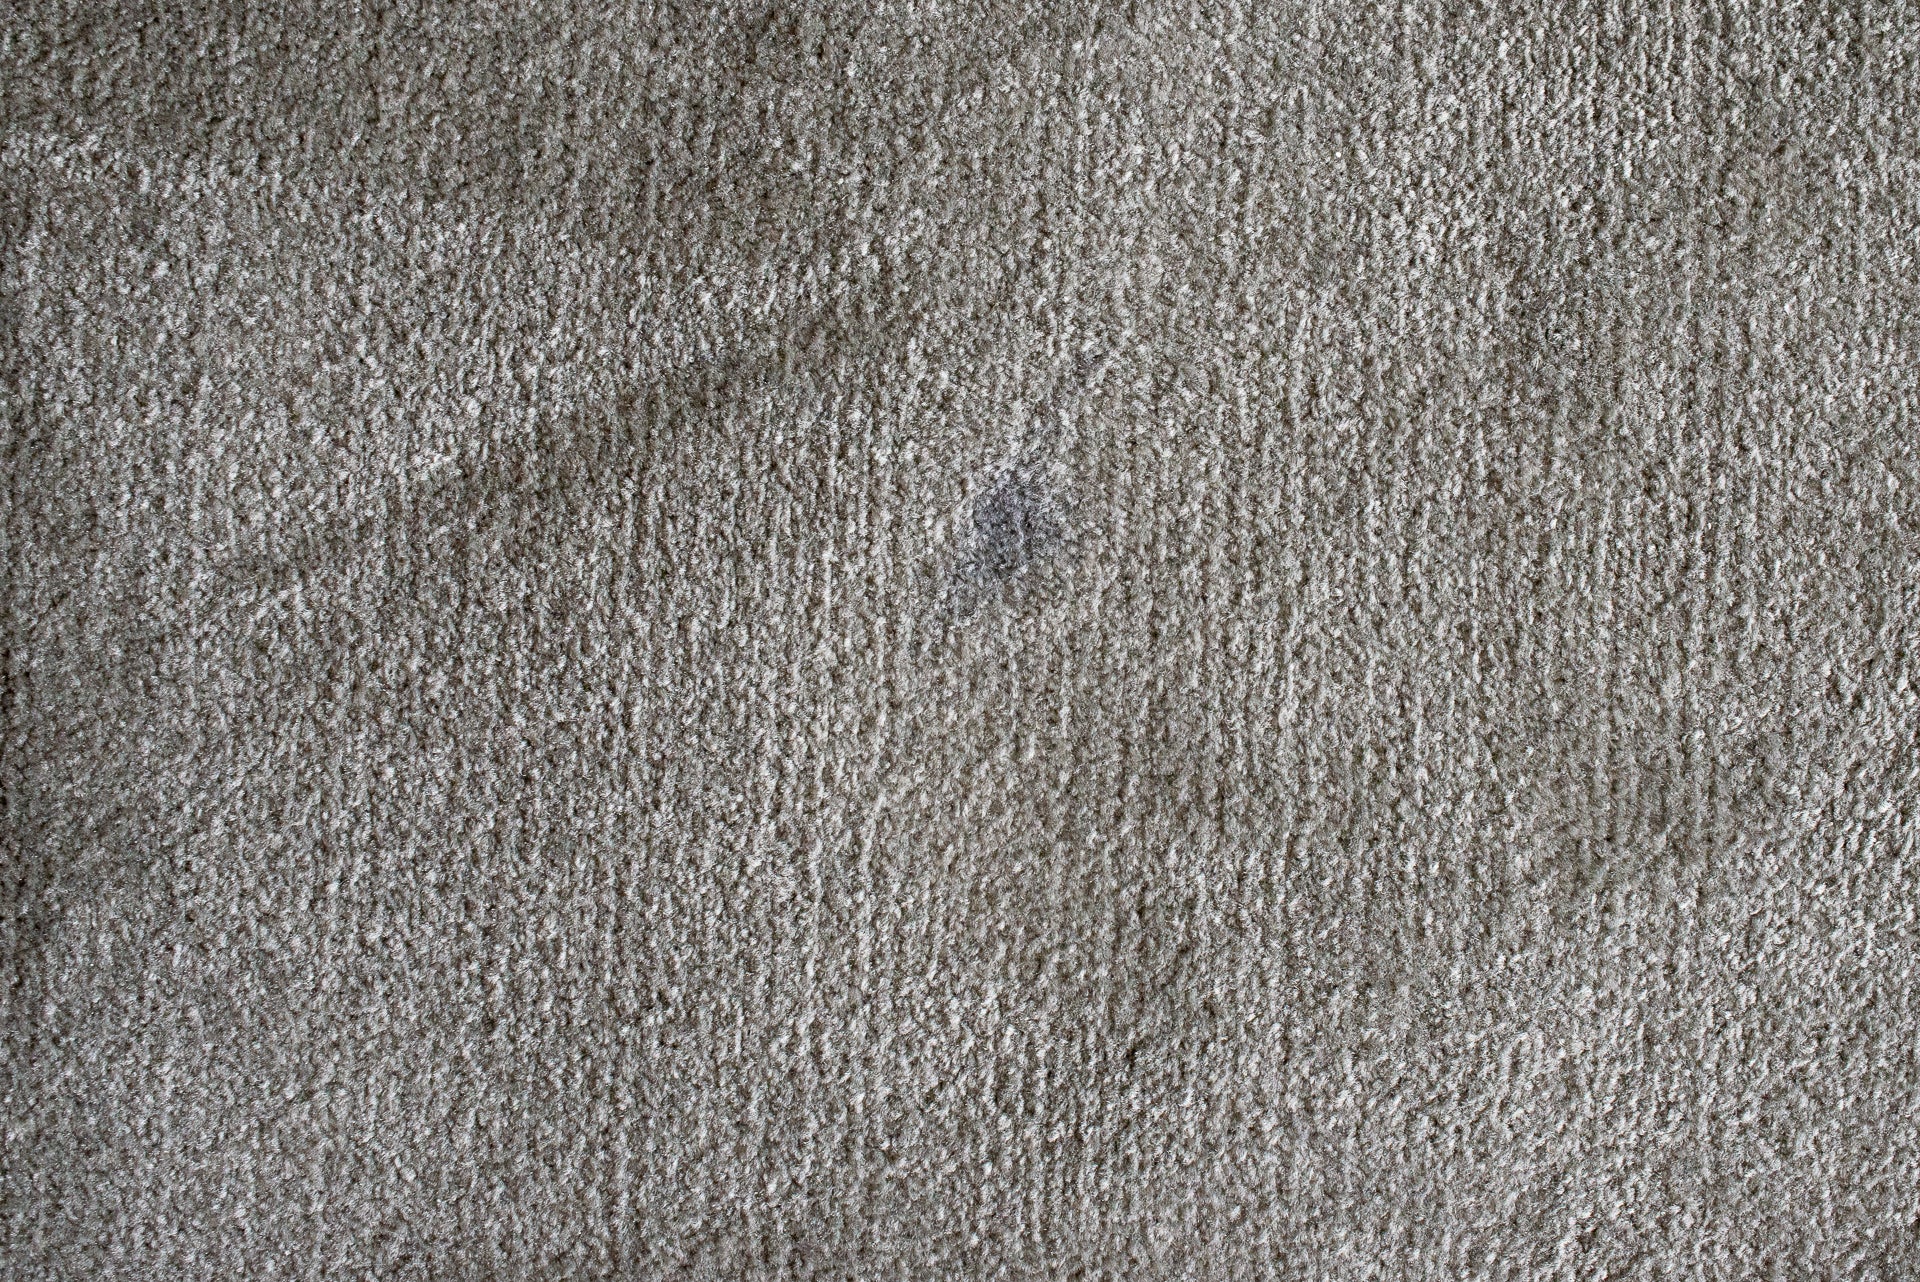 Carpet with a dirty spot, before cleaning.